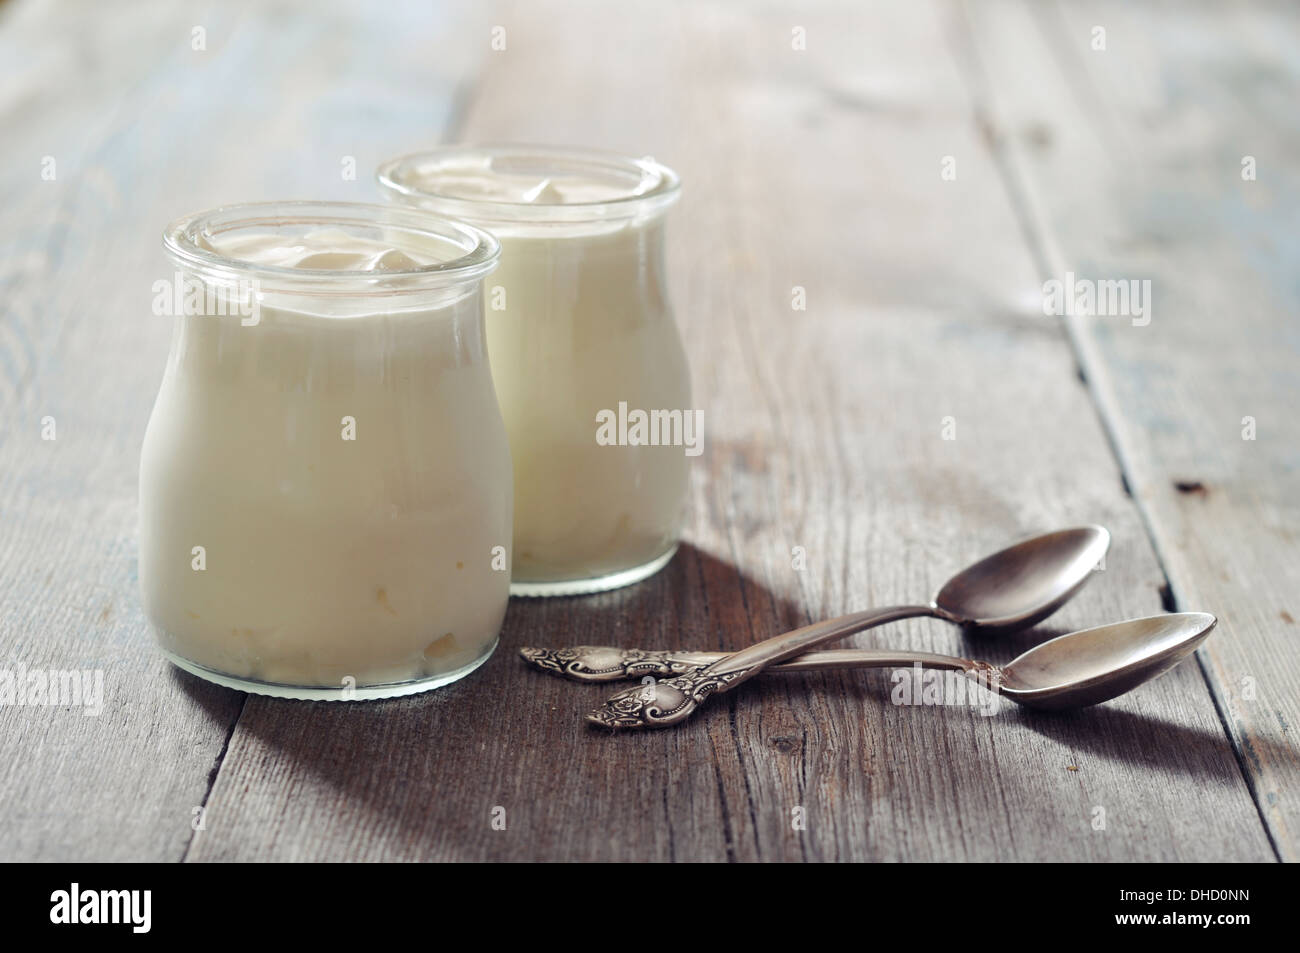 Greek yogurt in a glass jars with spoons on wooden background Stock Photo